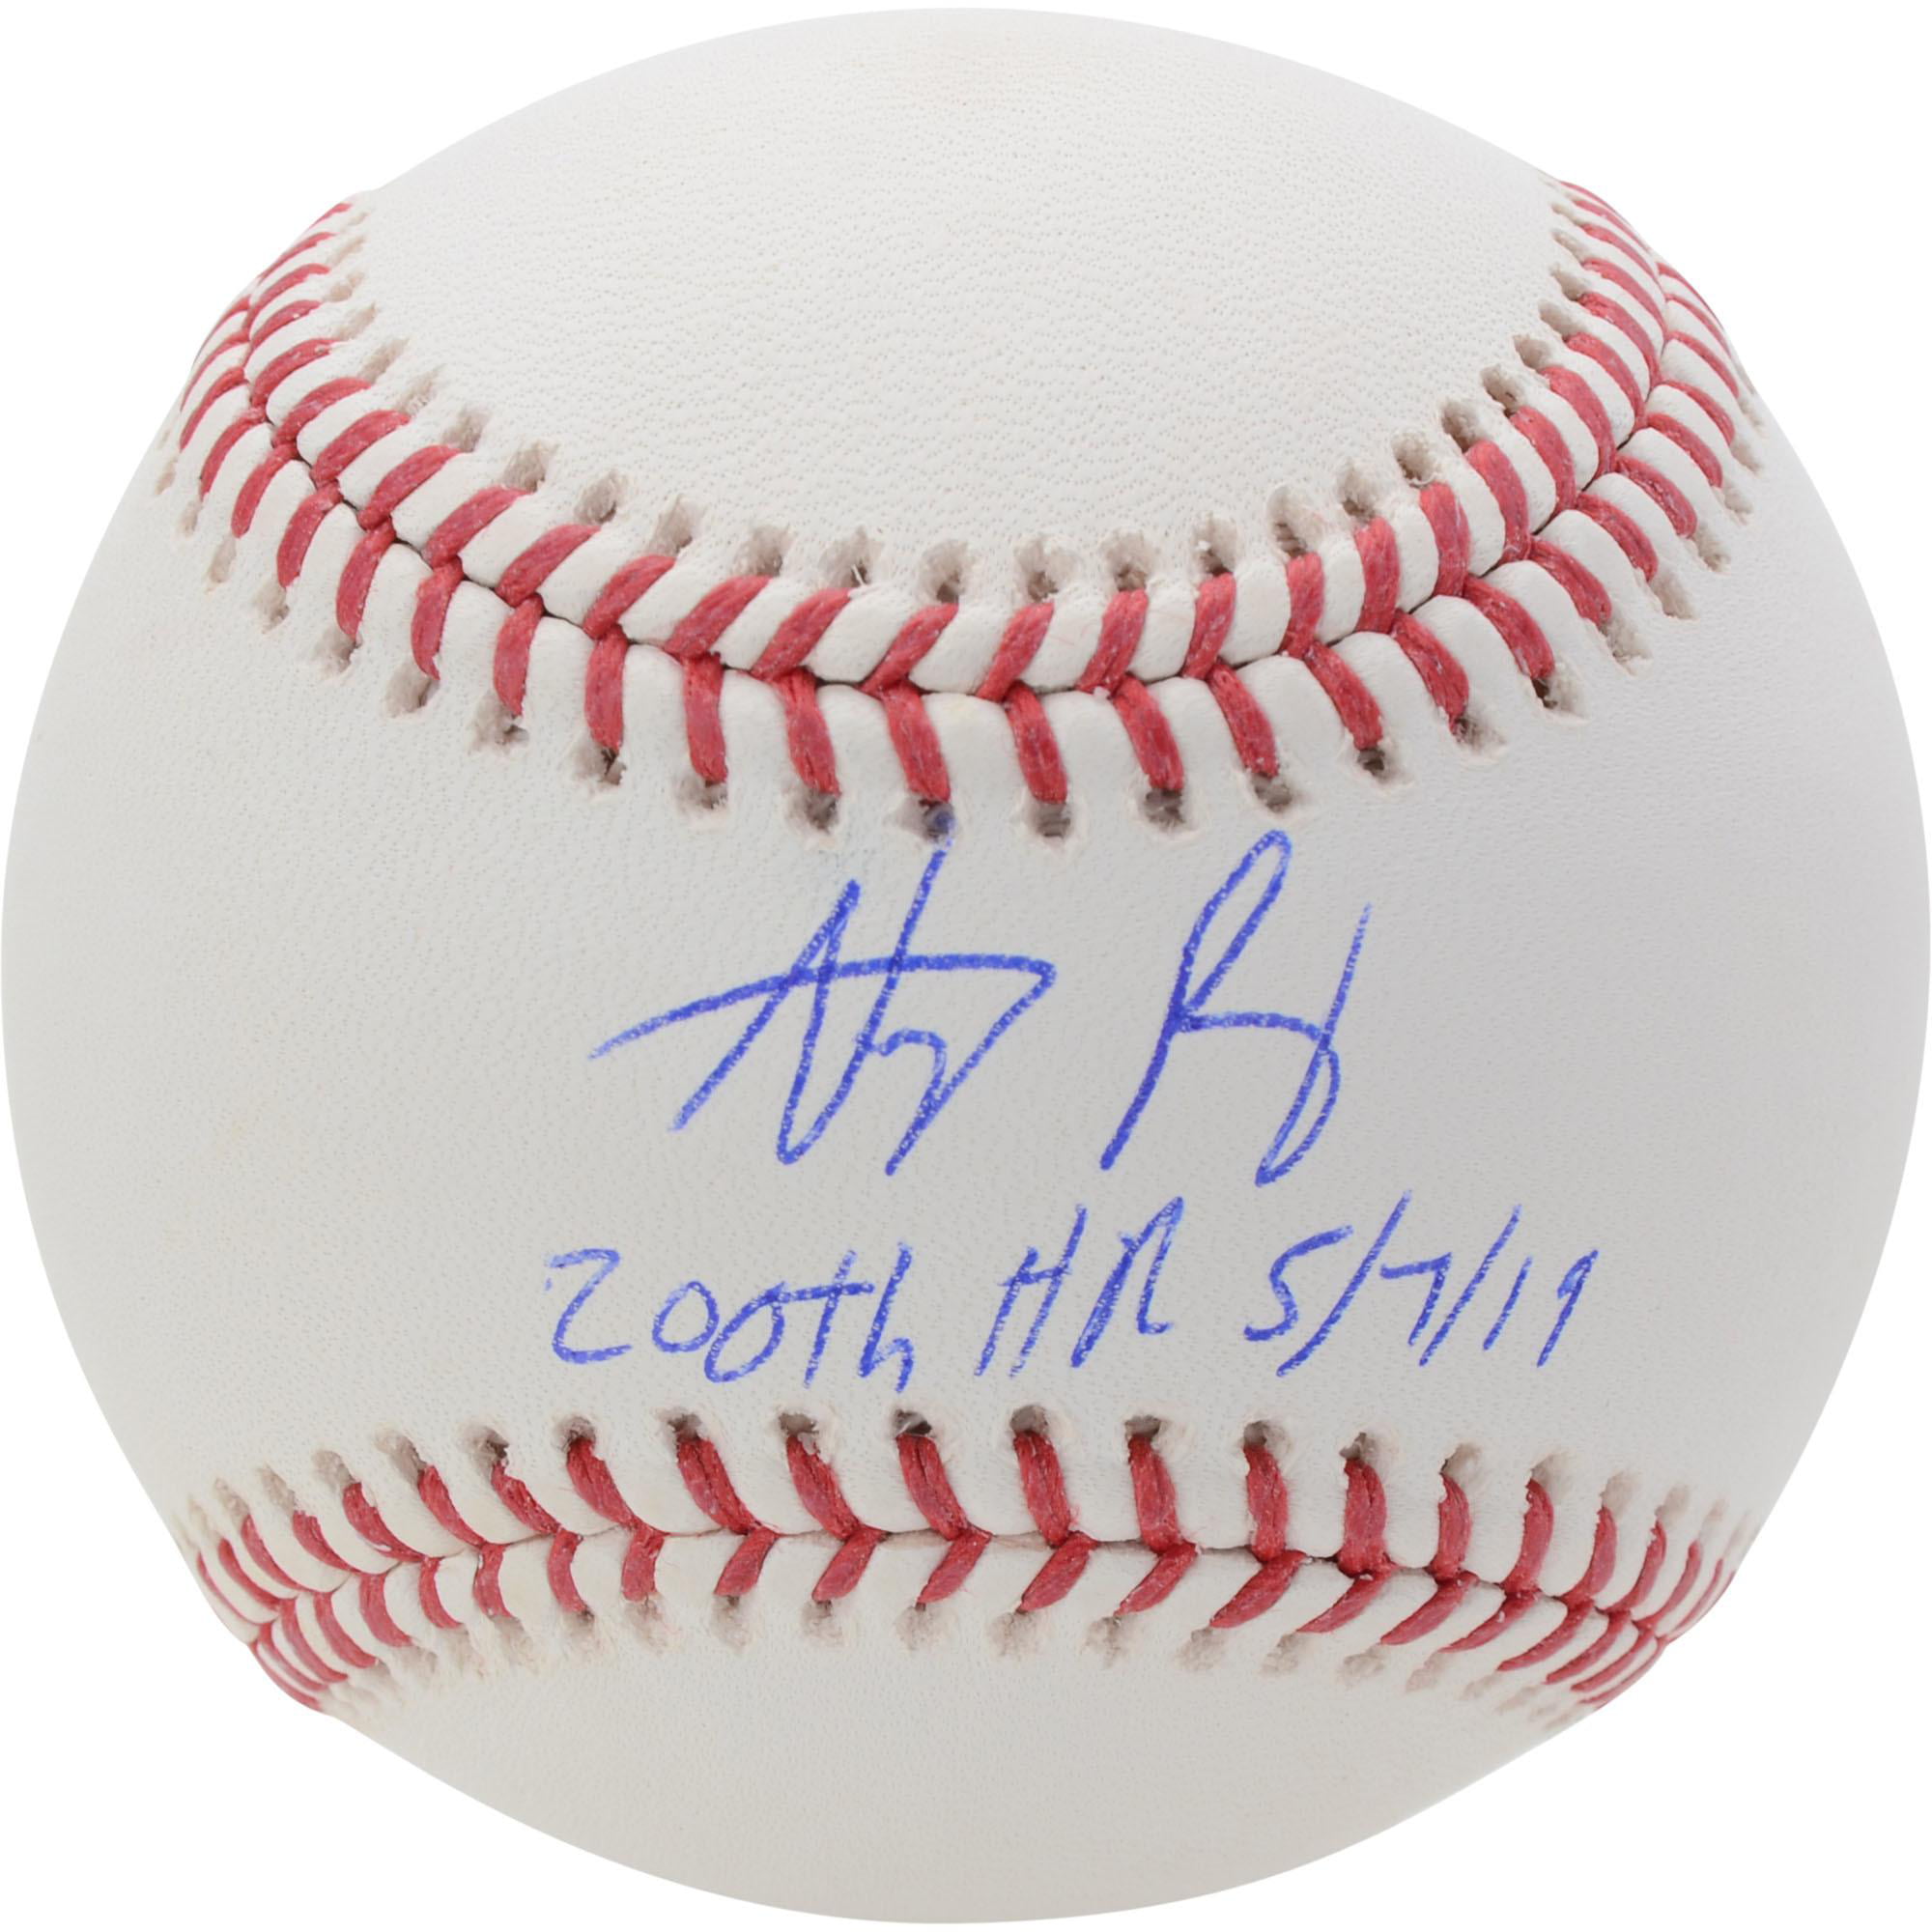 Fanatics Authentic Andre Dawson Chicago Cubs Autographed Baseball with 87 NL MVP Inscription